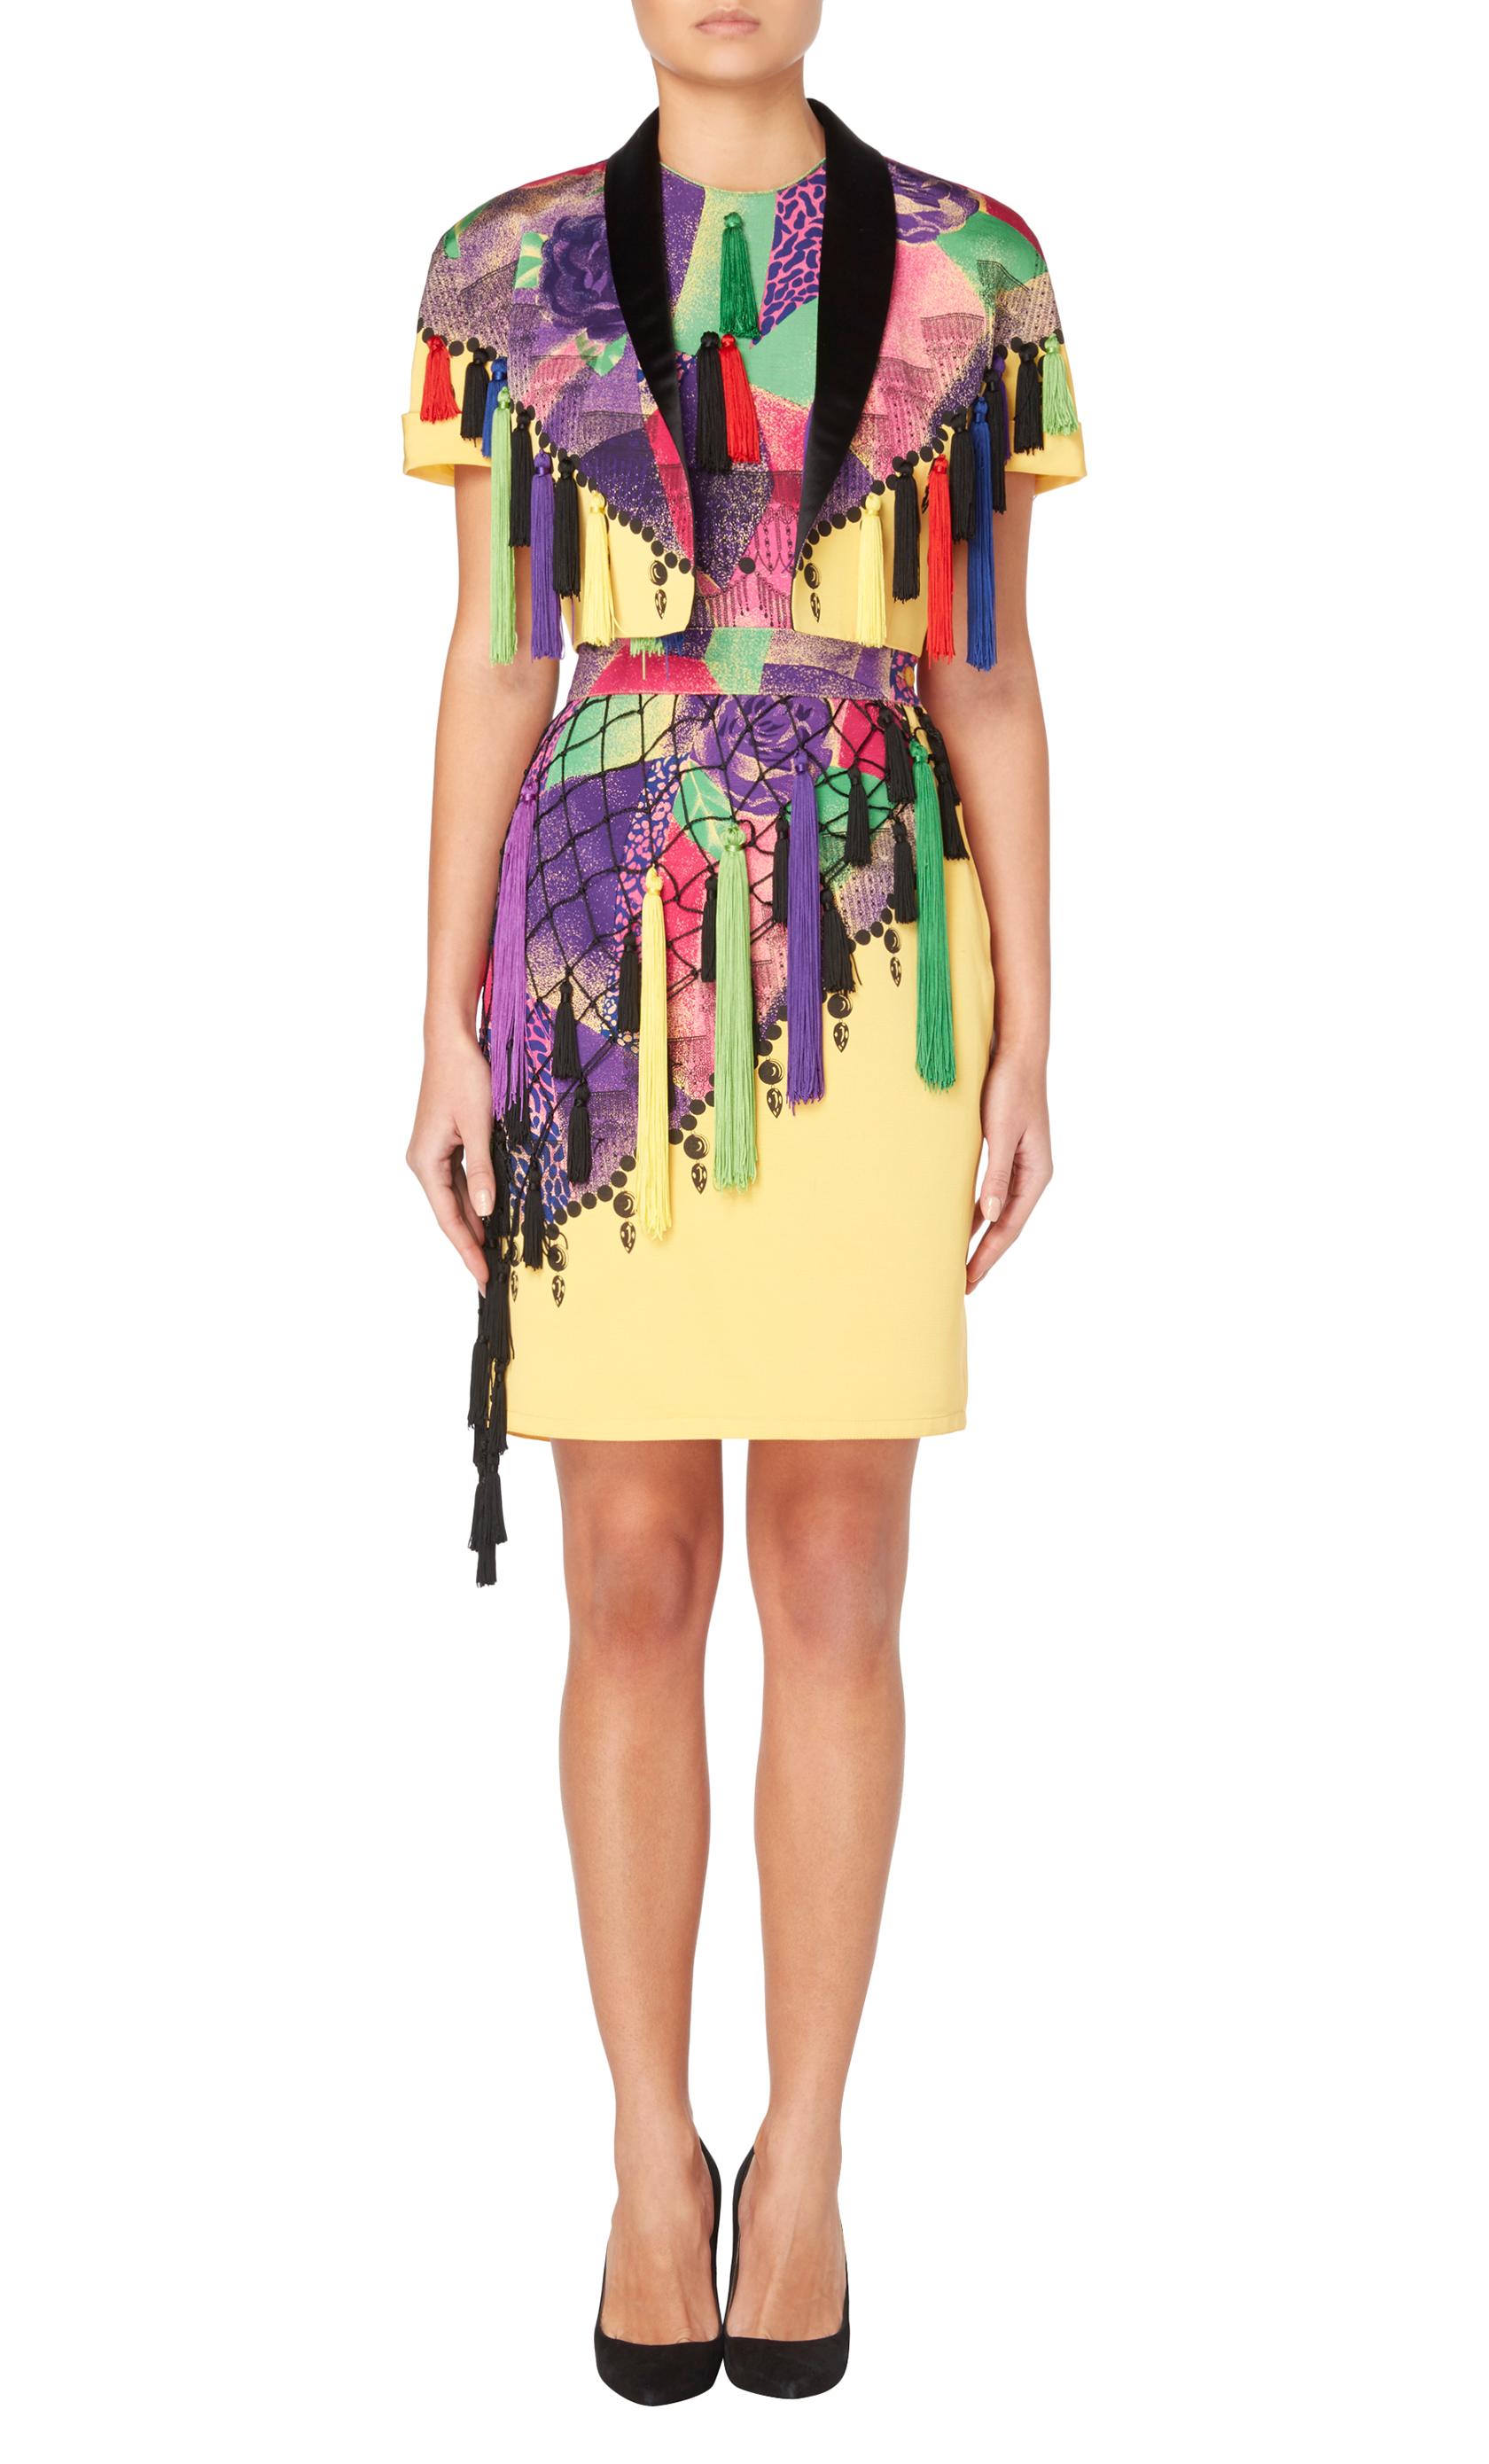 A Gianni Versace multicolour cotton blend tassel three-piece ensemble from the Spring/Summer 1990 collection.
Constructed in cotton, cupro and rayon.
